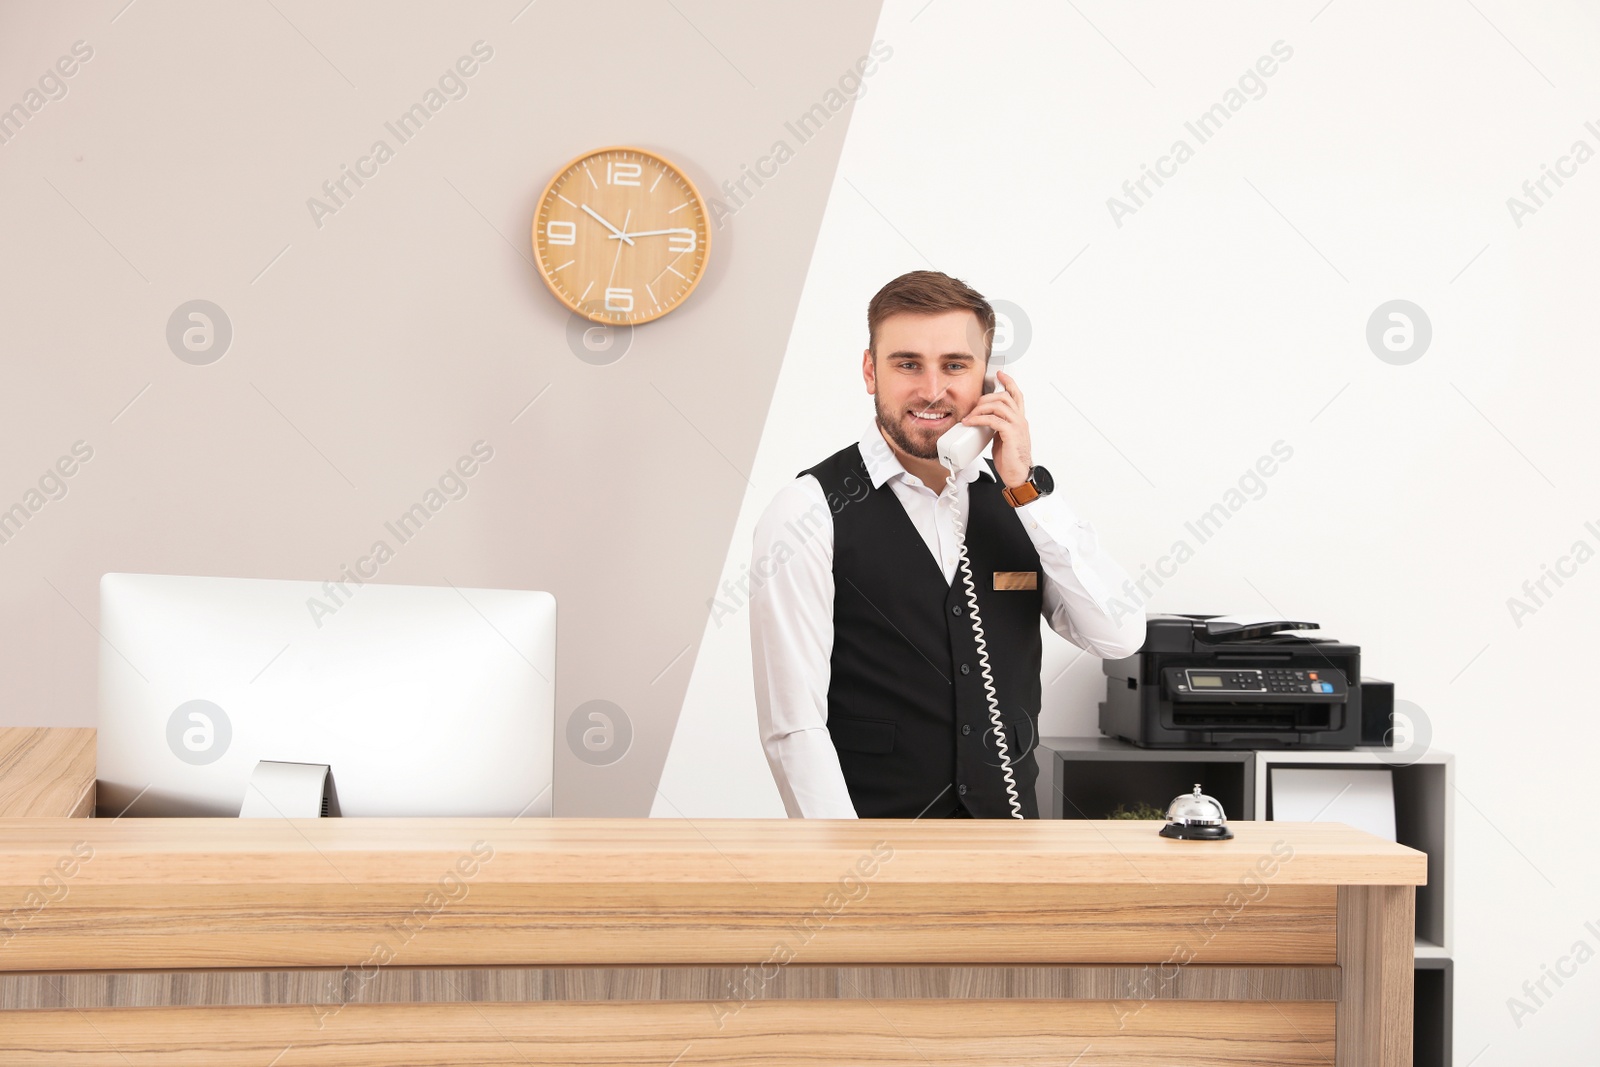 Photo of Receptionist talking on telephone at desk in modern hotel